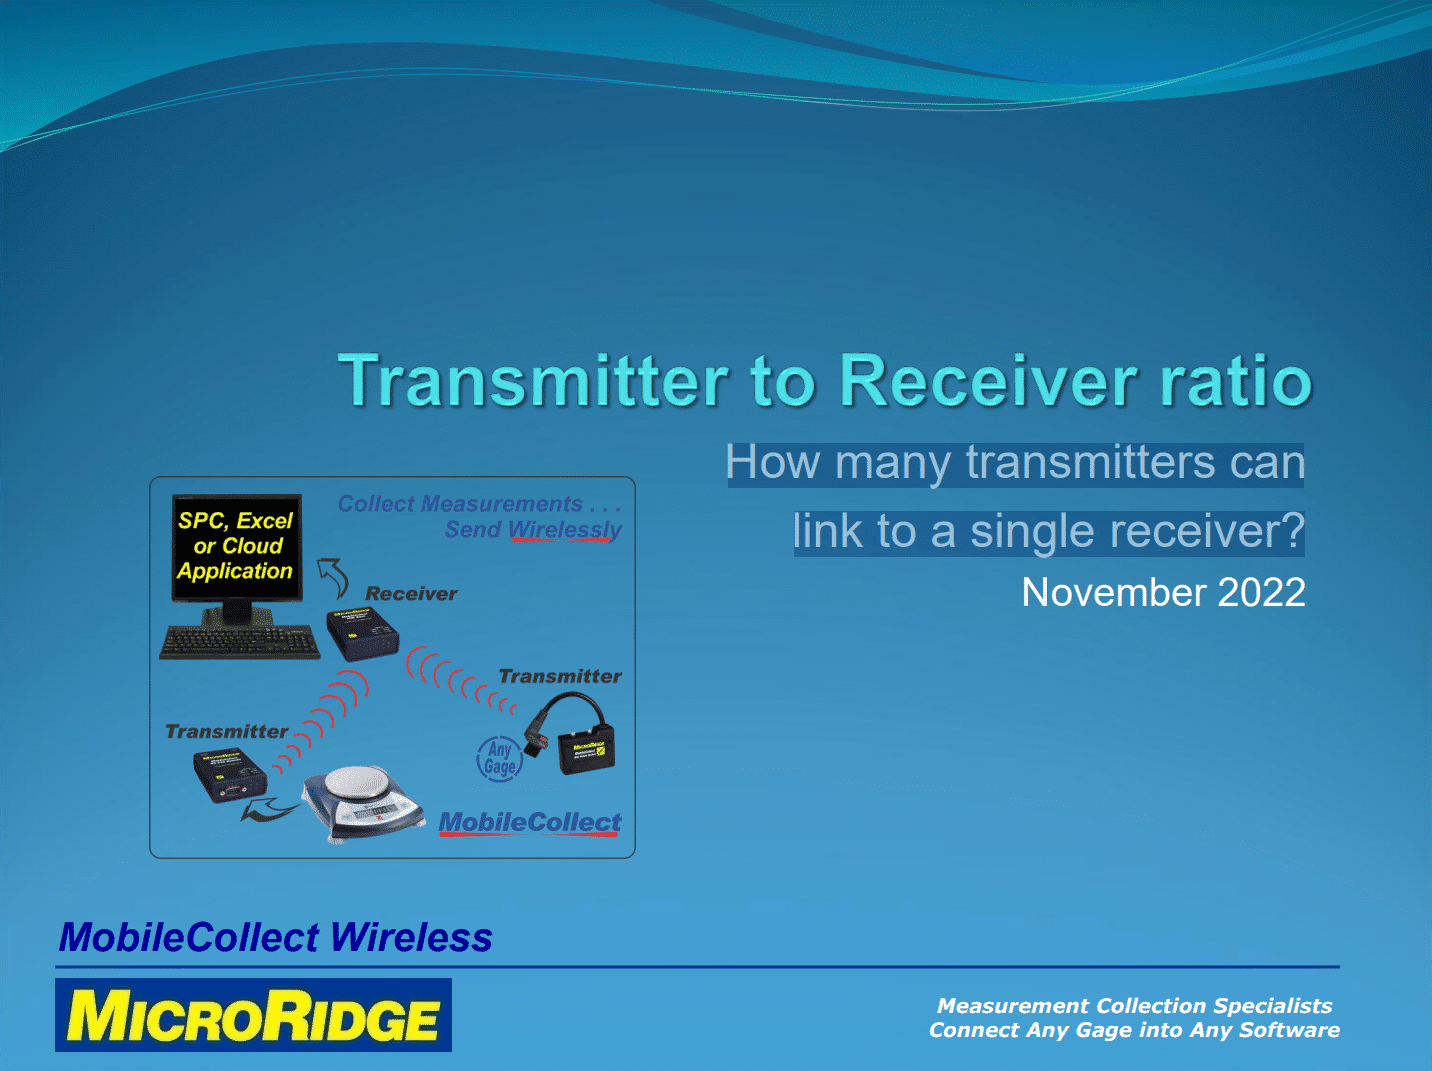 Transmitter to Receiver Ratio